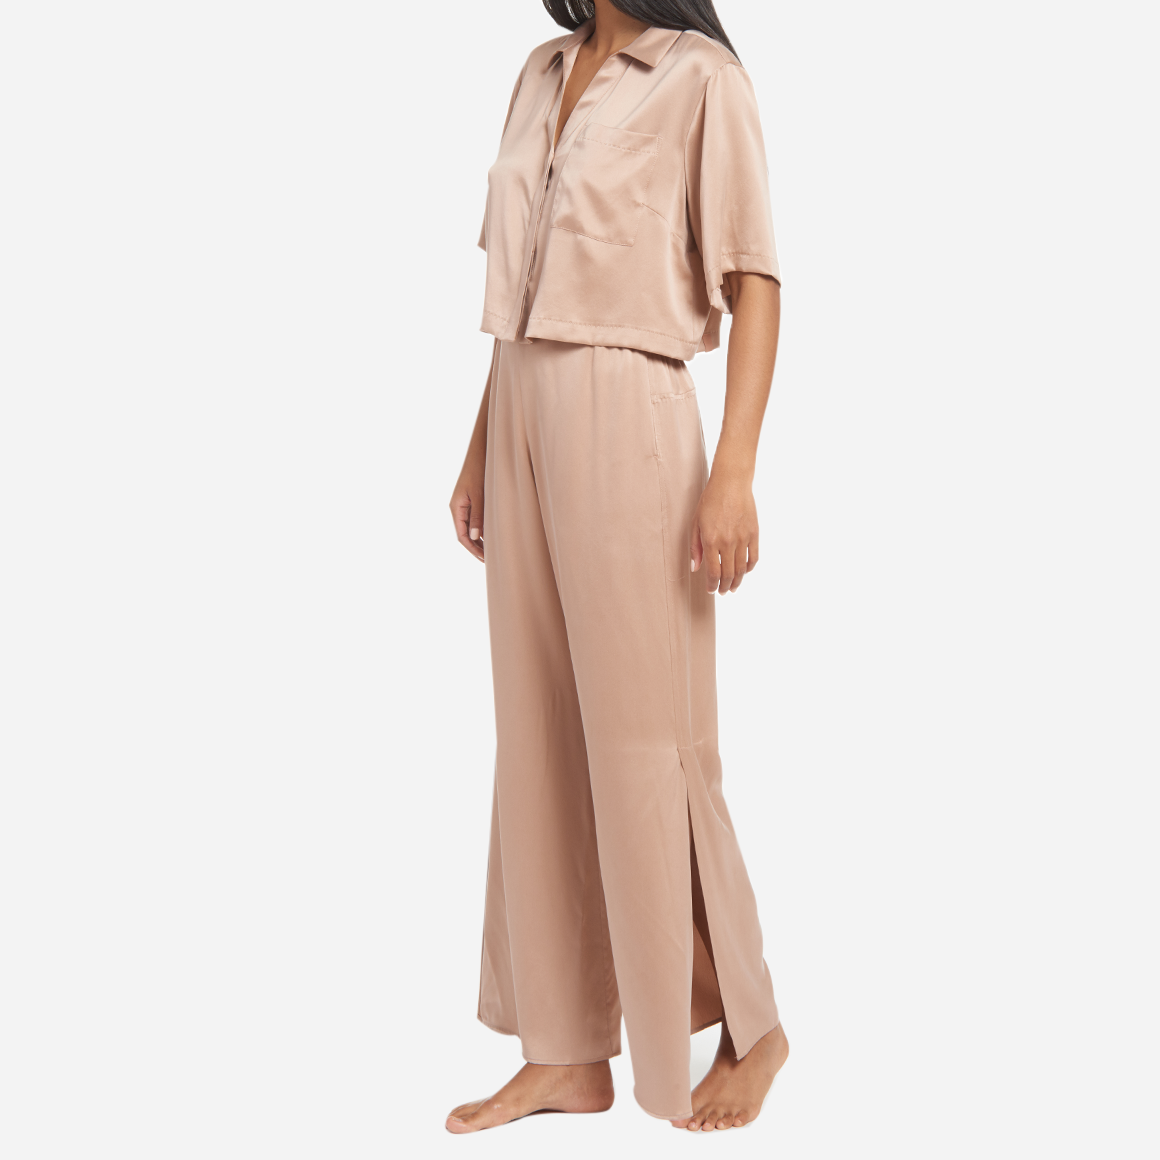 The high-waisted pants have pockets at the hip and side slits at the ankles for added ventilation. The matching short sleeve top is cropped at the waist, has a flattering v-neckline, and chest pocket. The lightweight and breathable fabric makes it perfect for lounging or sleeping, while the elegant design adds a touch of sophistication to your sleepwear collection.